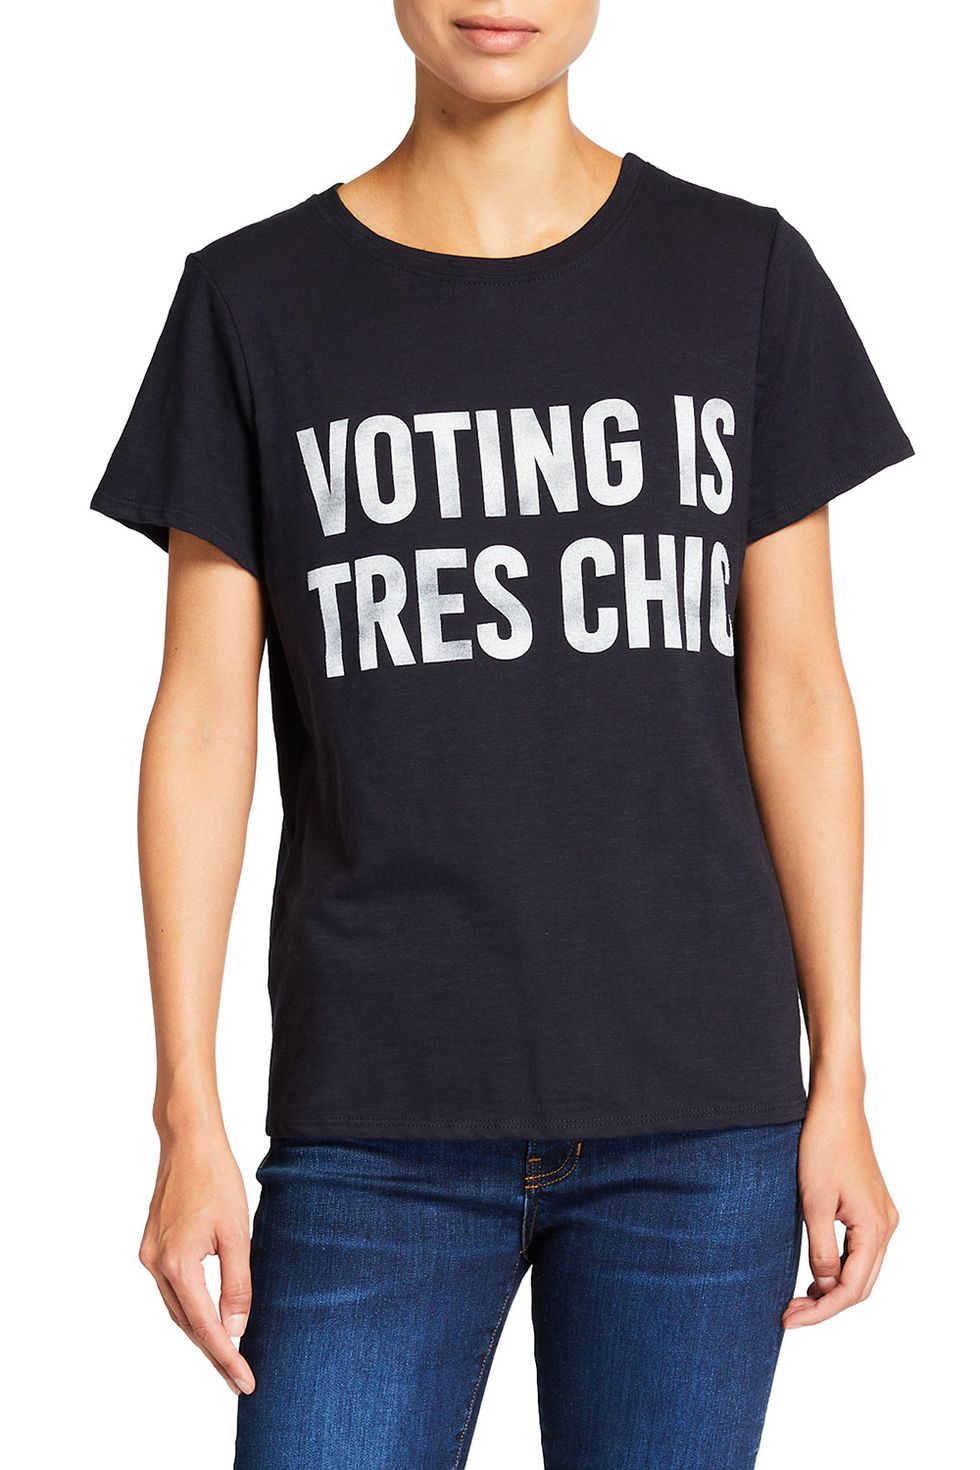 Voting Is Tres Chic Tee